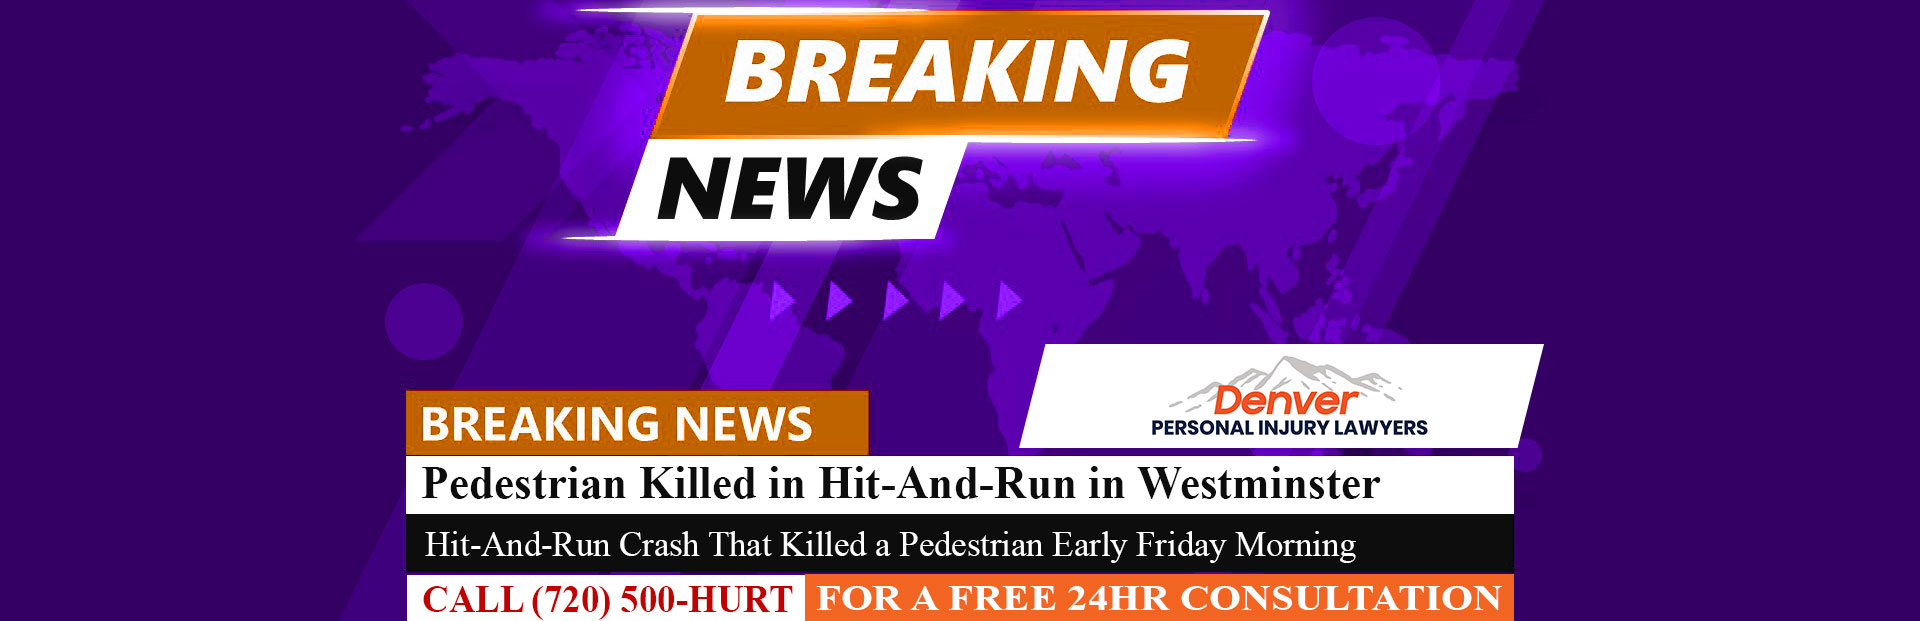 [10-24-22] Pedestrian Killed in Hit-And-Run in Westminster